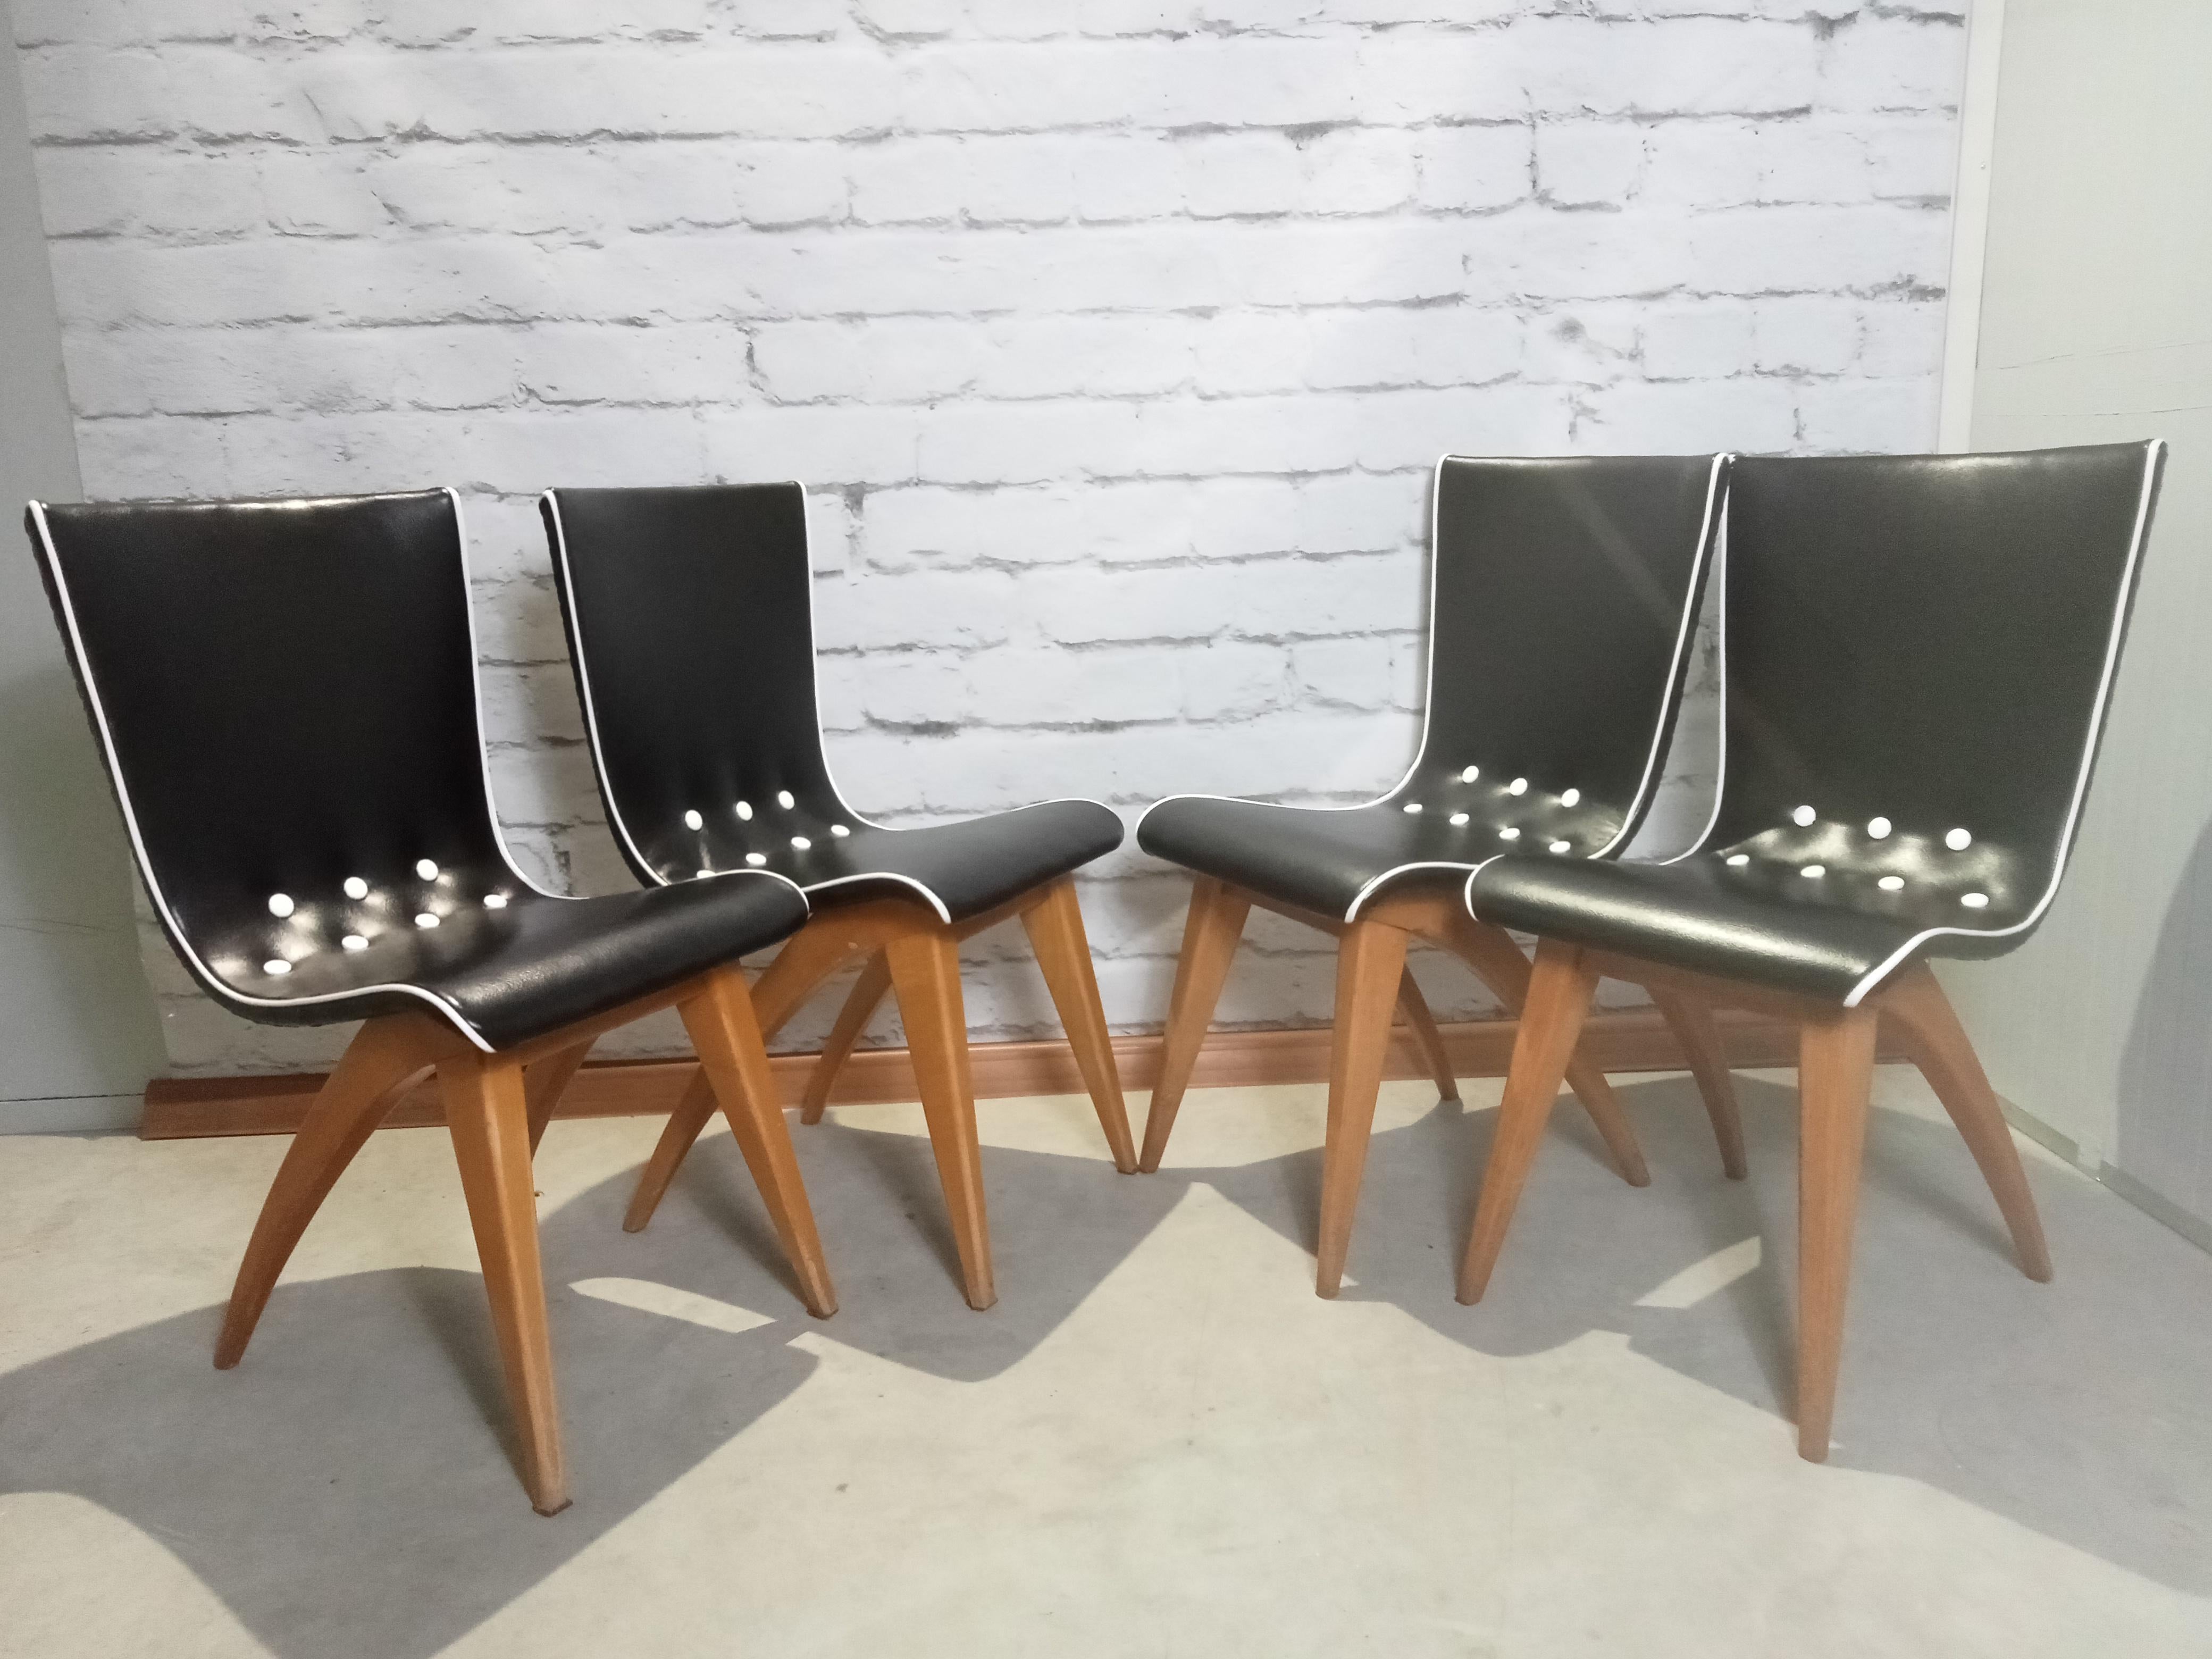 Swing Dining Chairs by G.J. Van Os for Van Os Culemborg, 1950's In Excellent Condition For Sale In Bunnik, NL